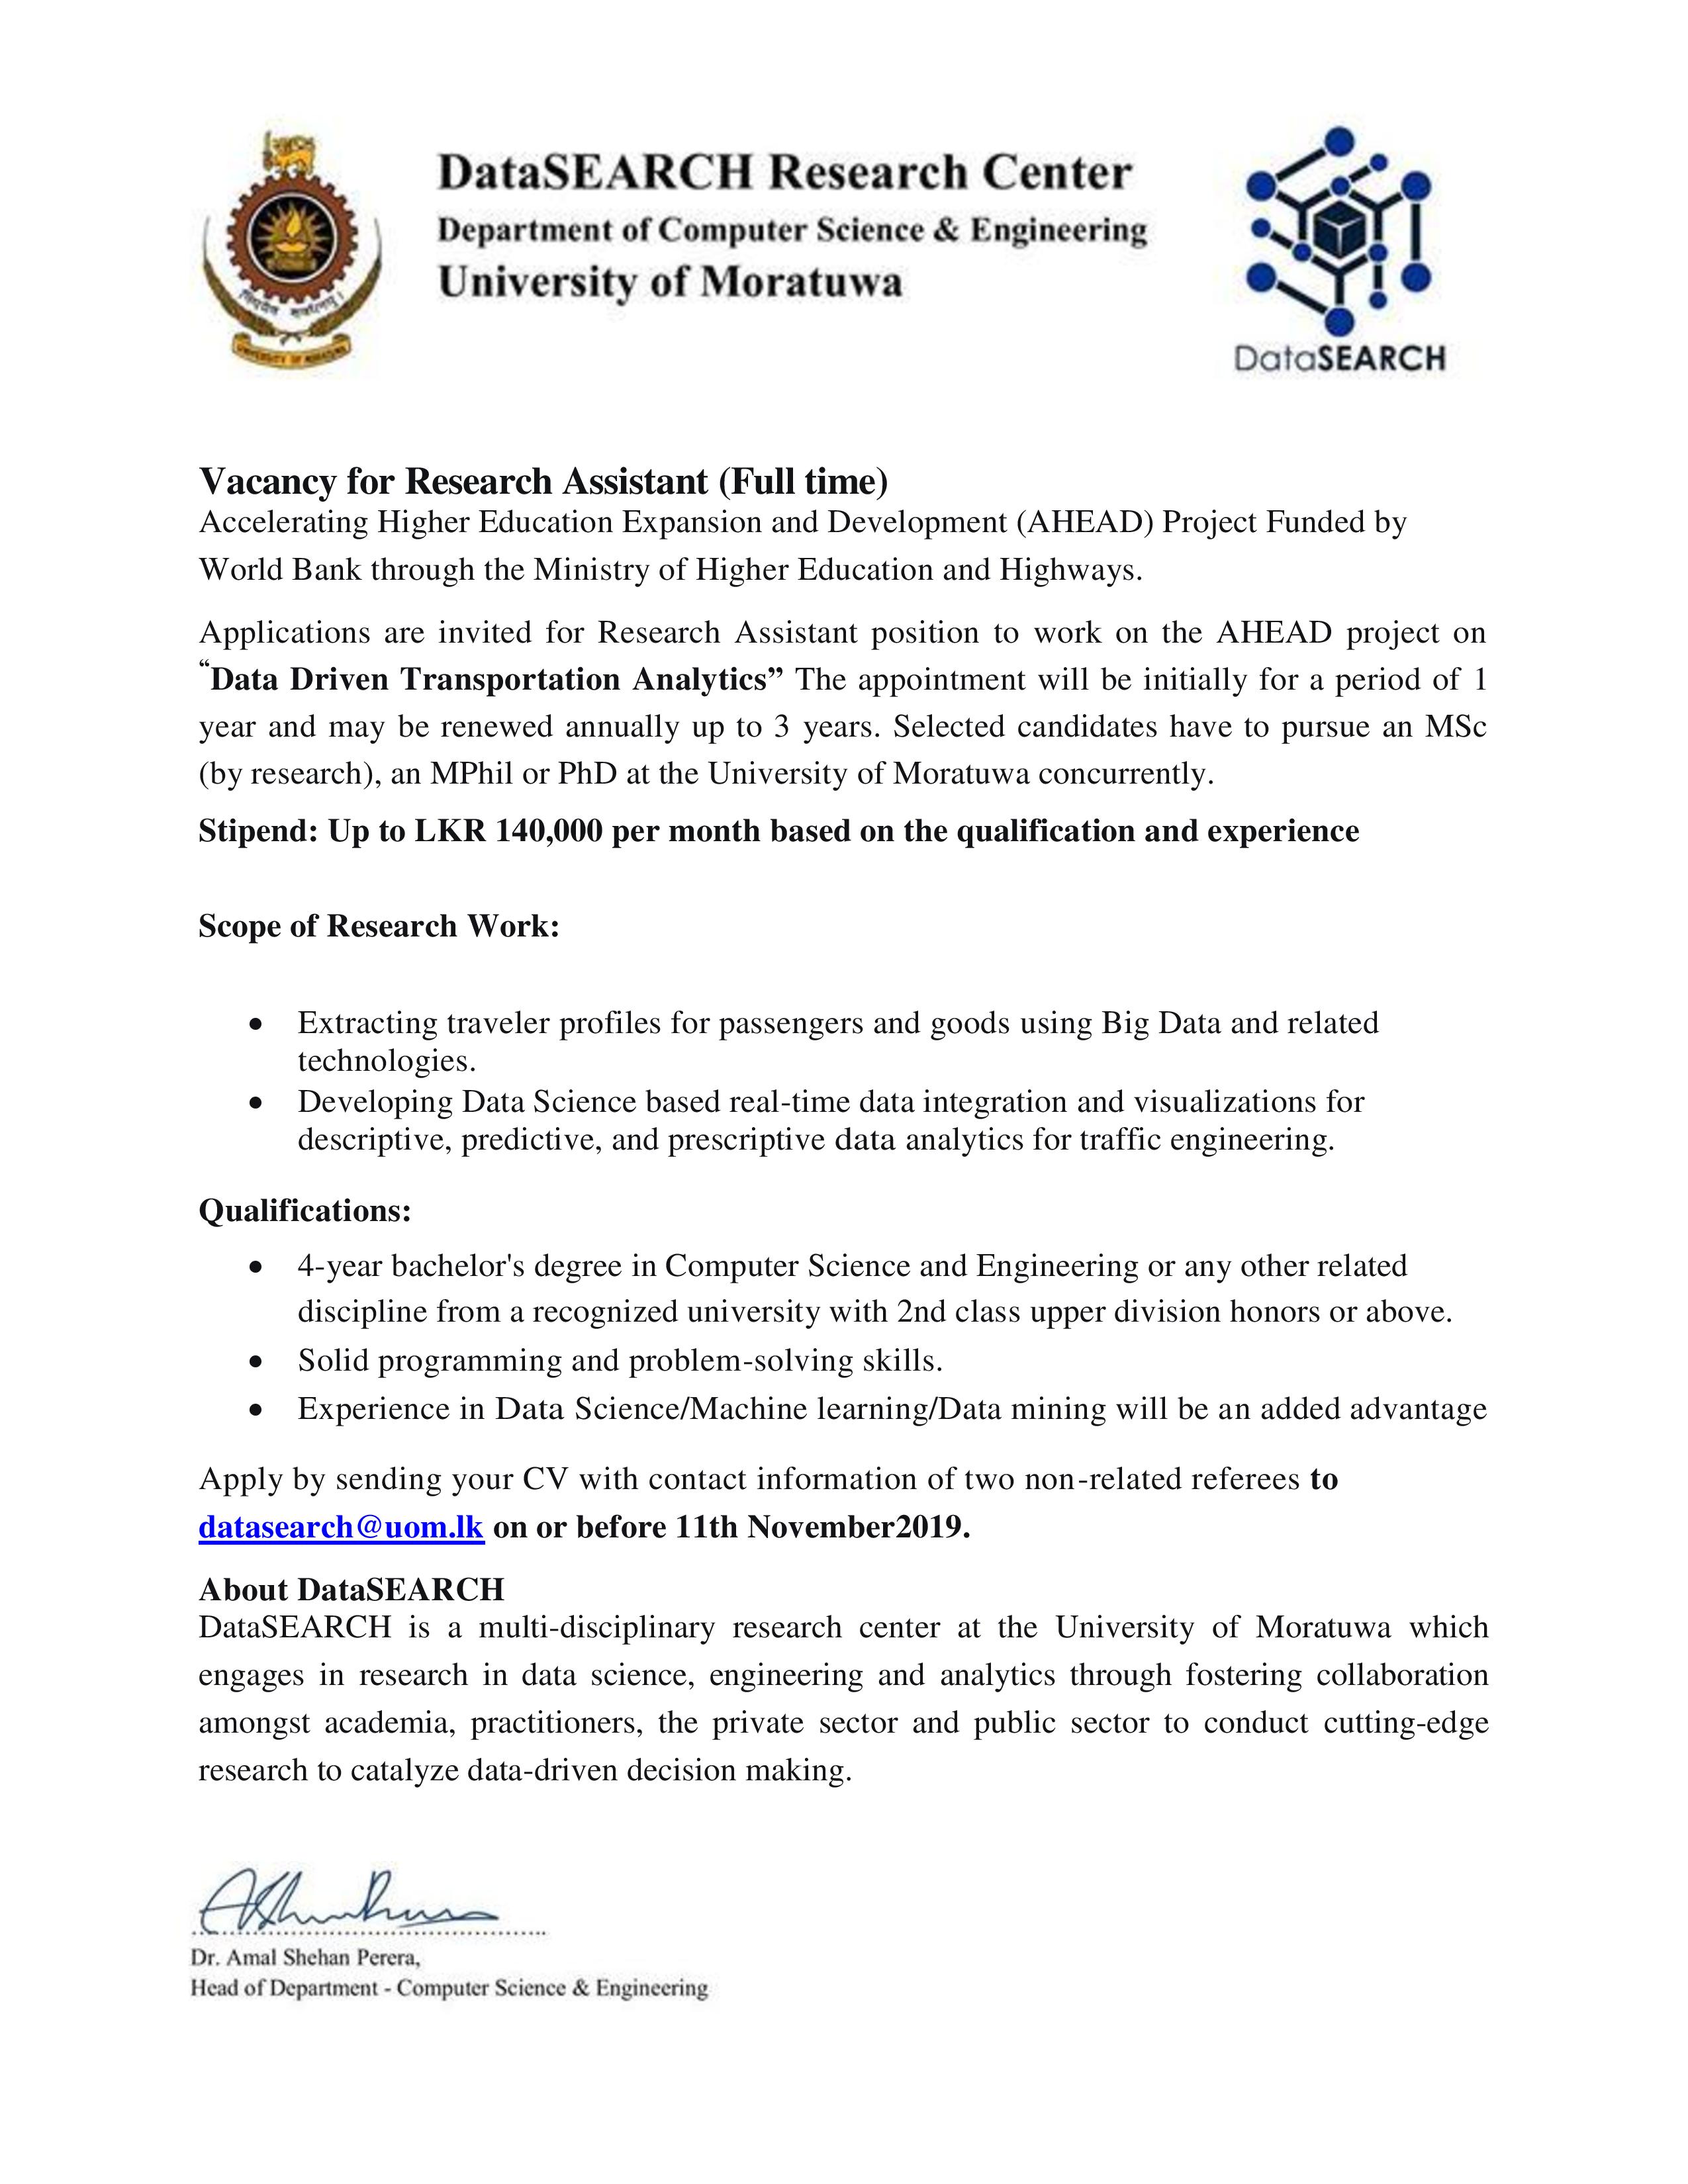 research assistant vacancies in malawi